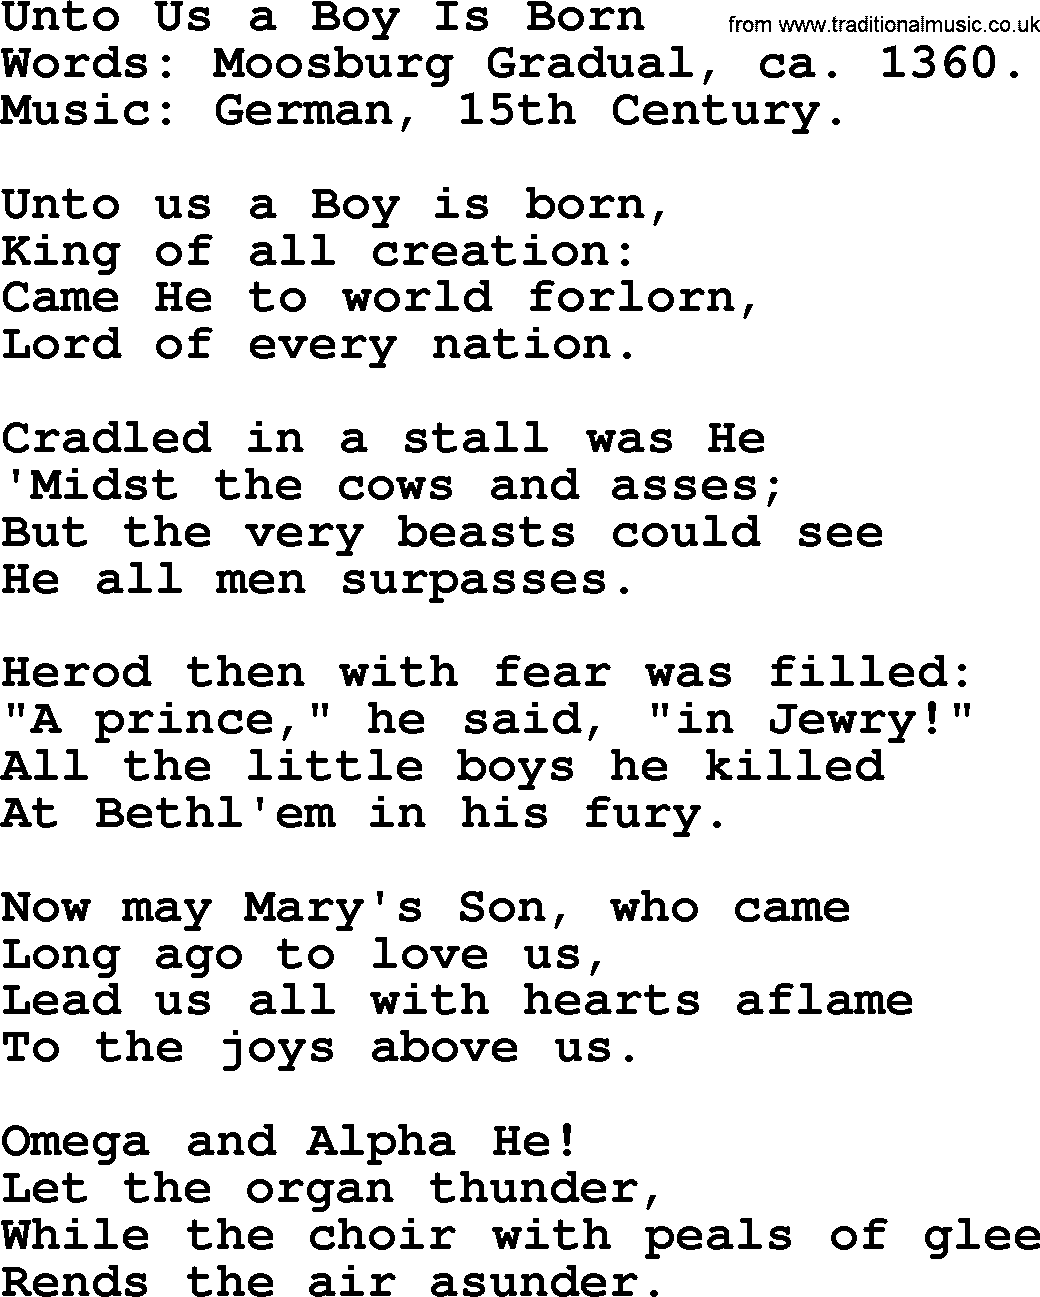 280 Christmas Hymns and songs with PowerPoints and PDF, title: Unto Us A Boy Is Born, lyrics, PPT and PDF